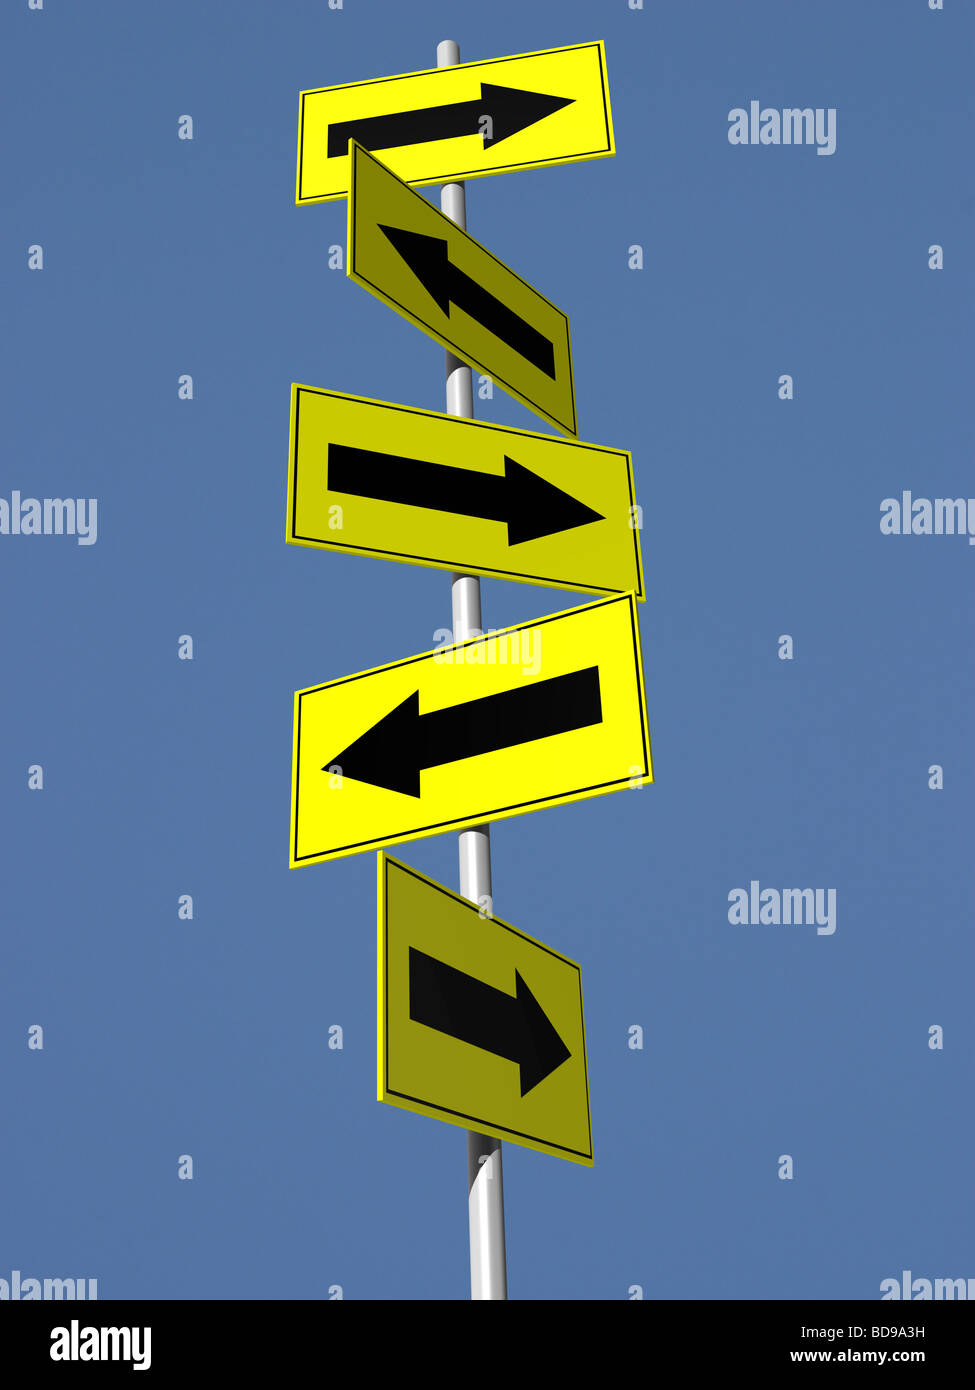 Five directional arrow signs on pole Stock Photo